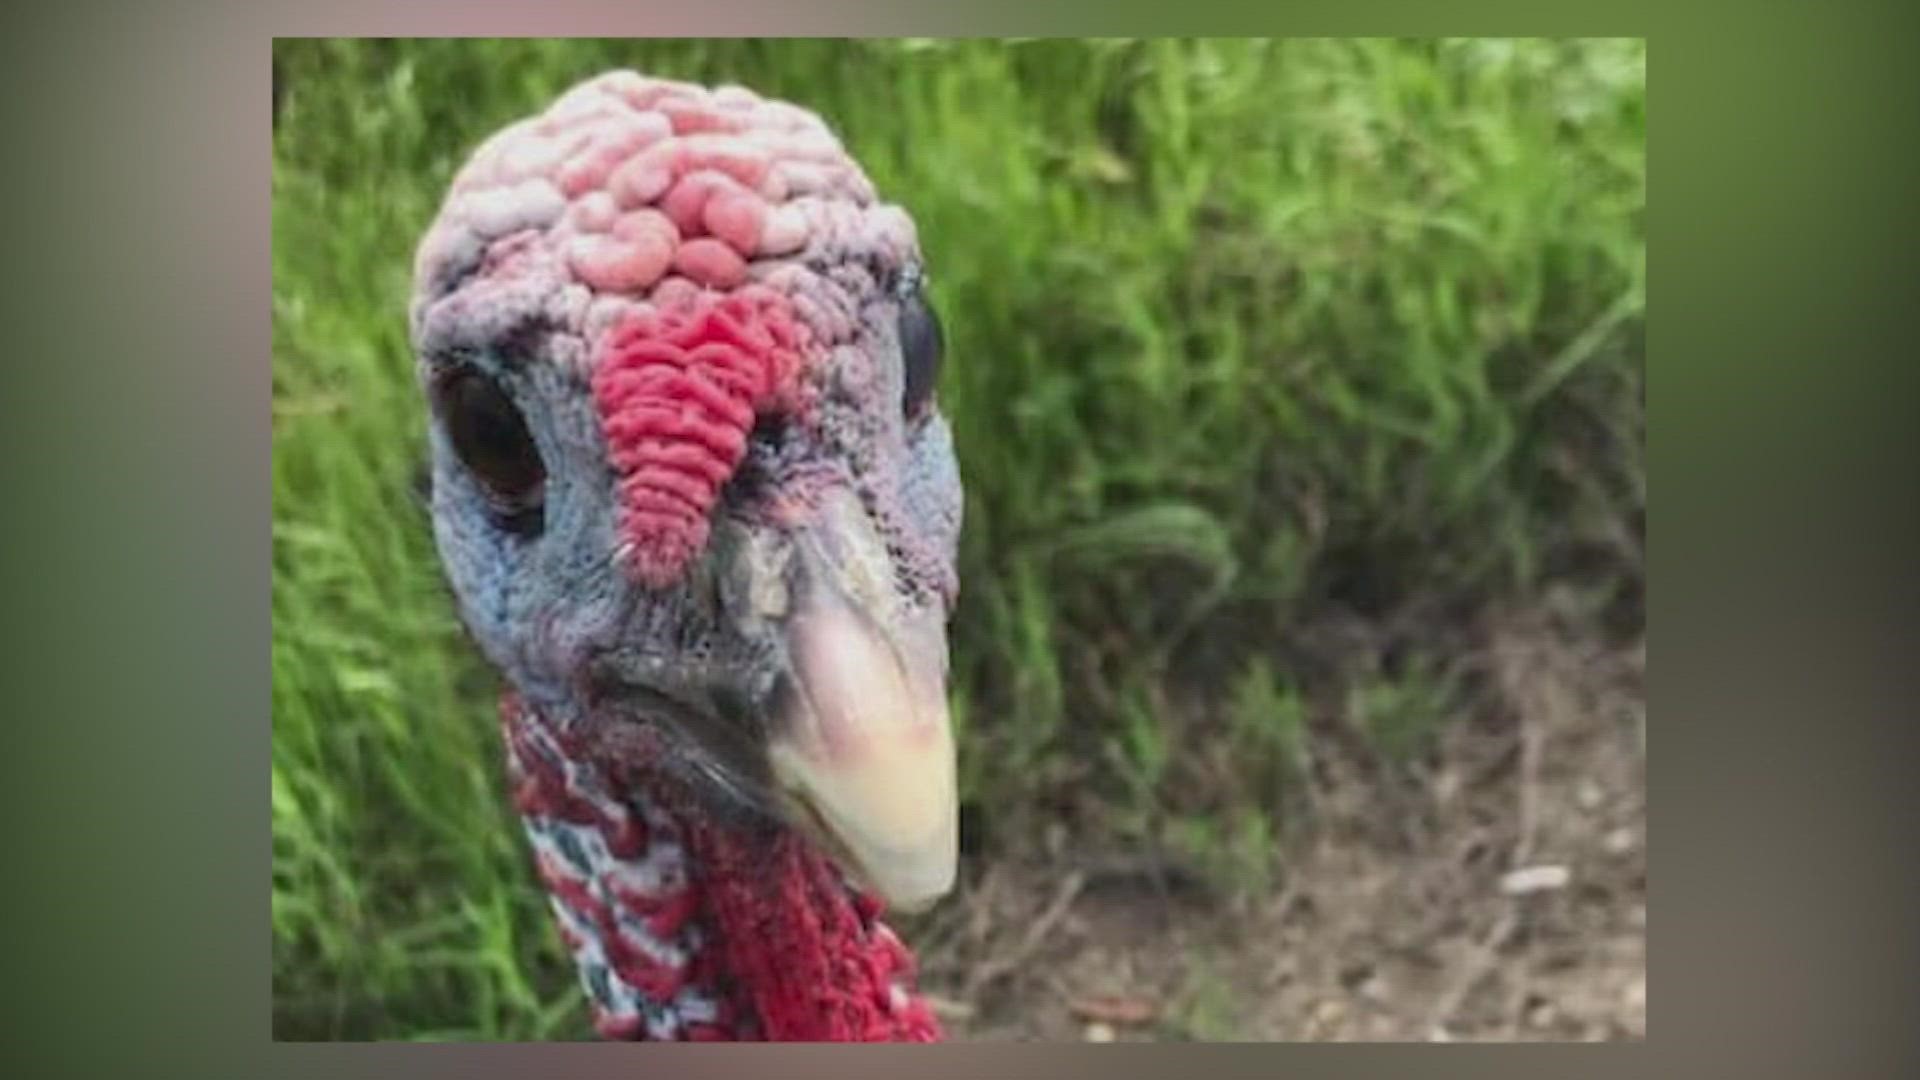 Tom the Turkey was known by everyone in town - an honorary community pet who would run in traffic, chase the kids, and peck at cars throughout Argyle.